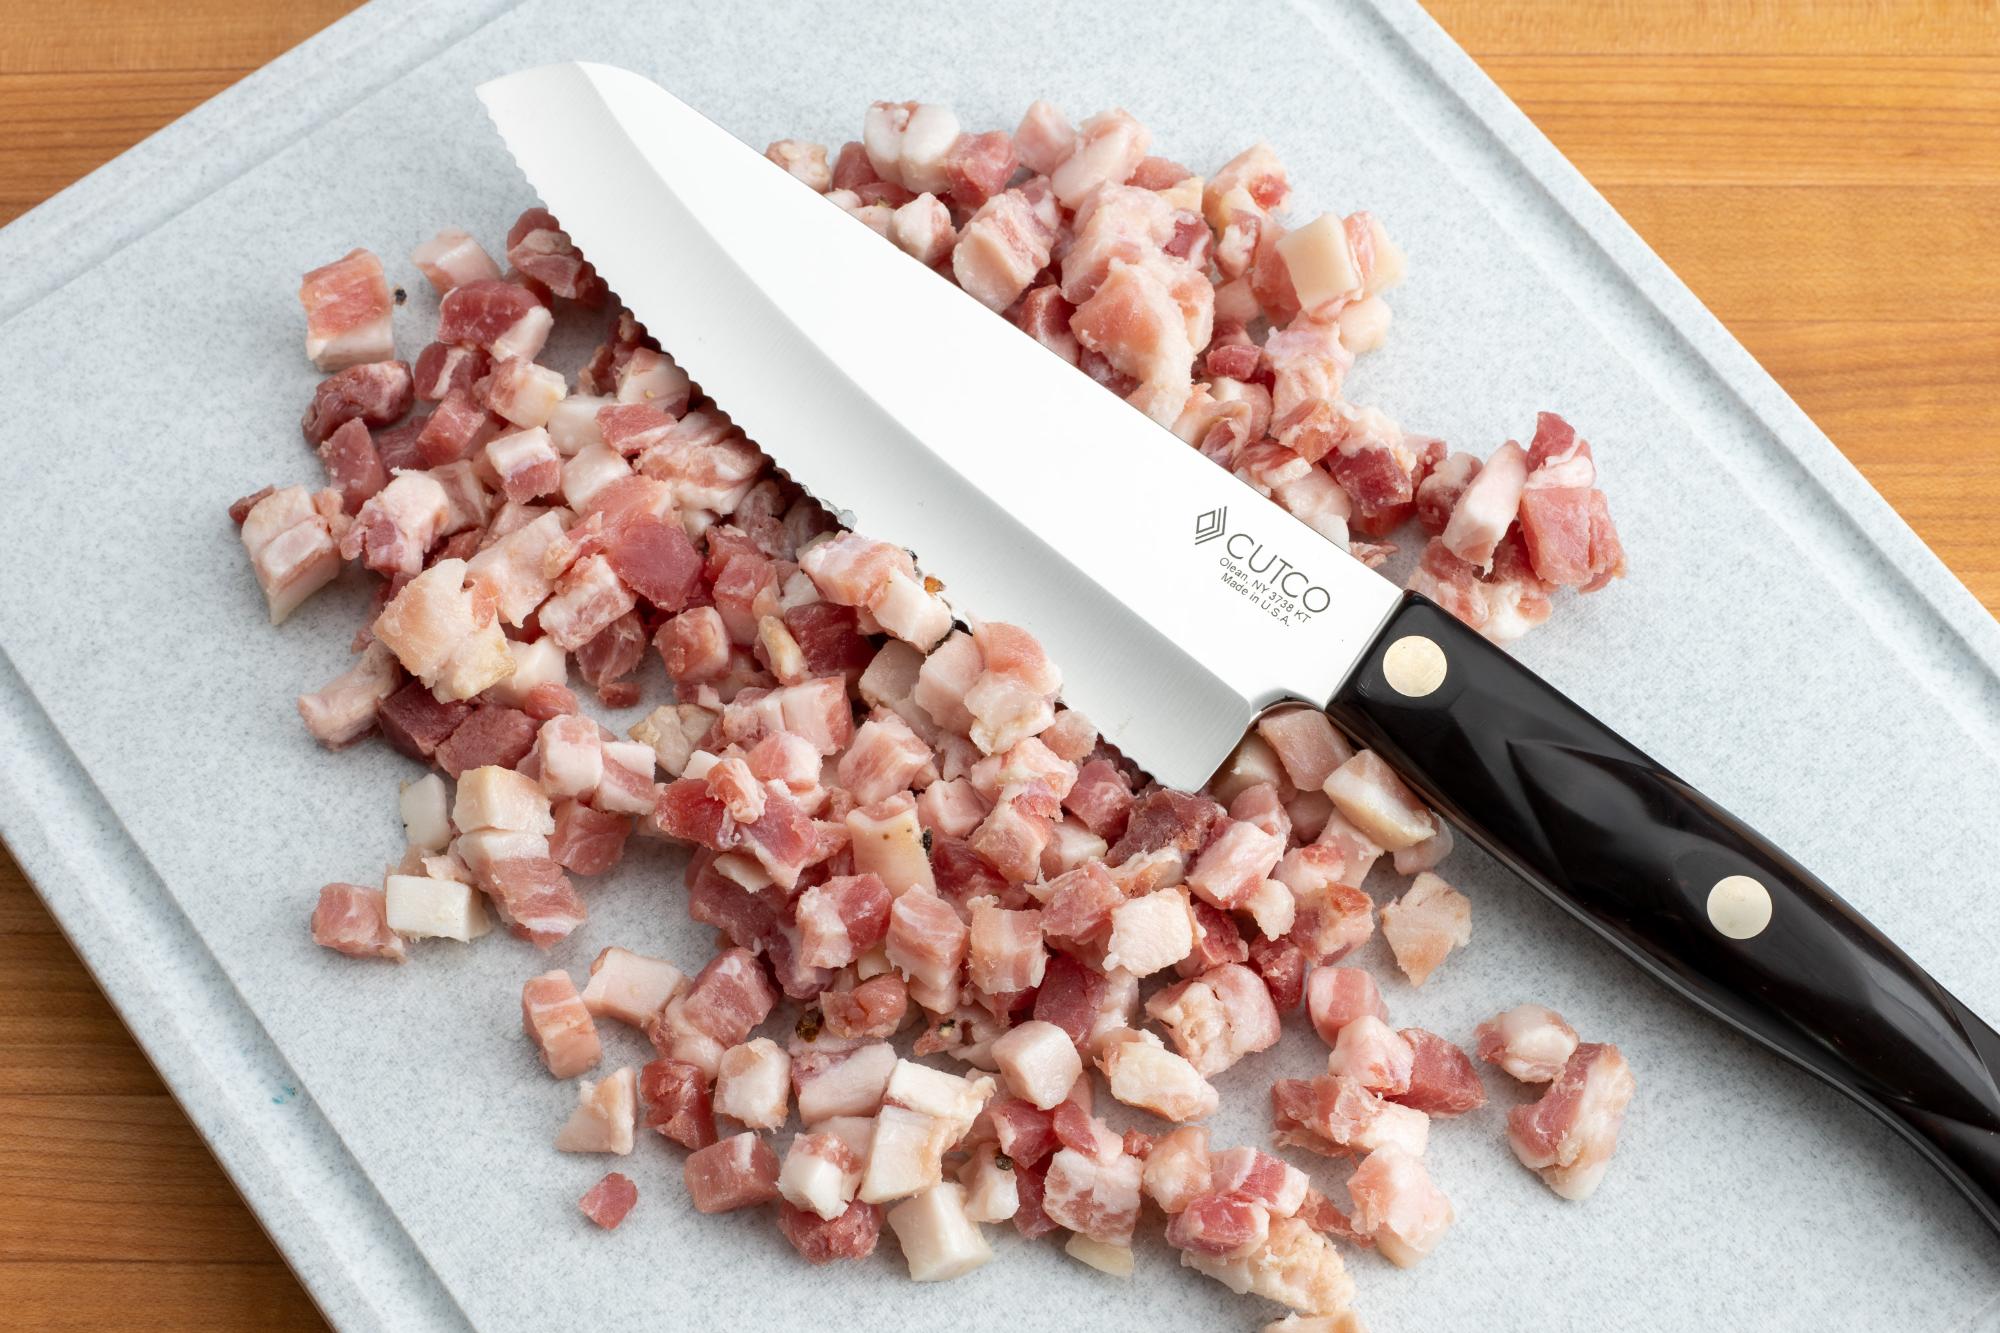 Hardy Slicer with diced pancetta.